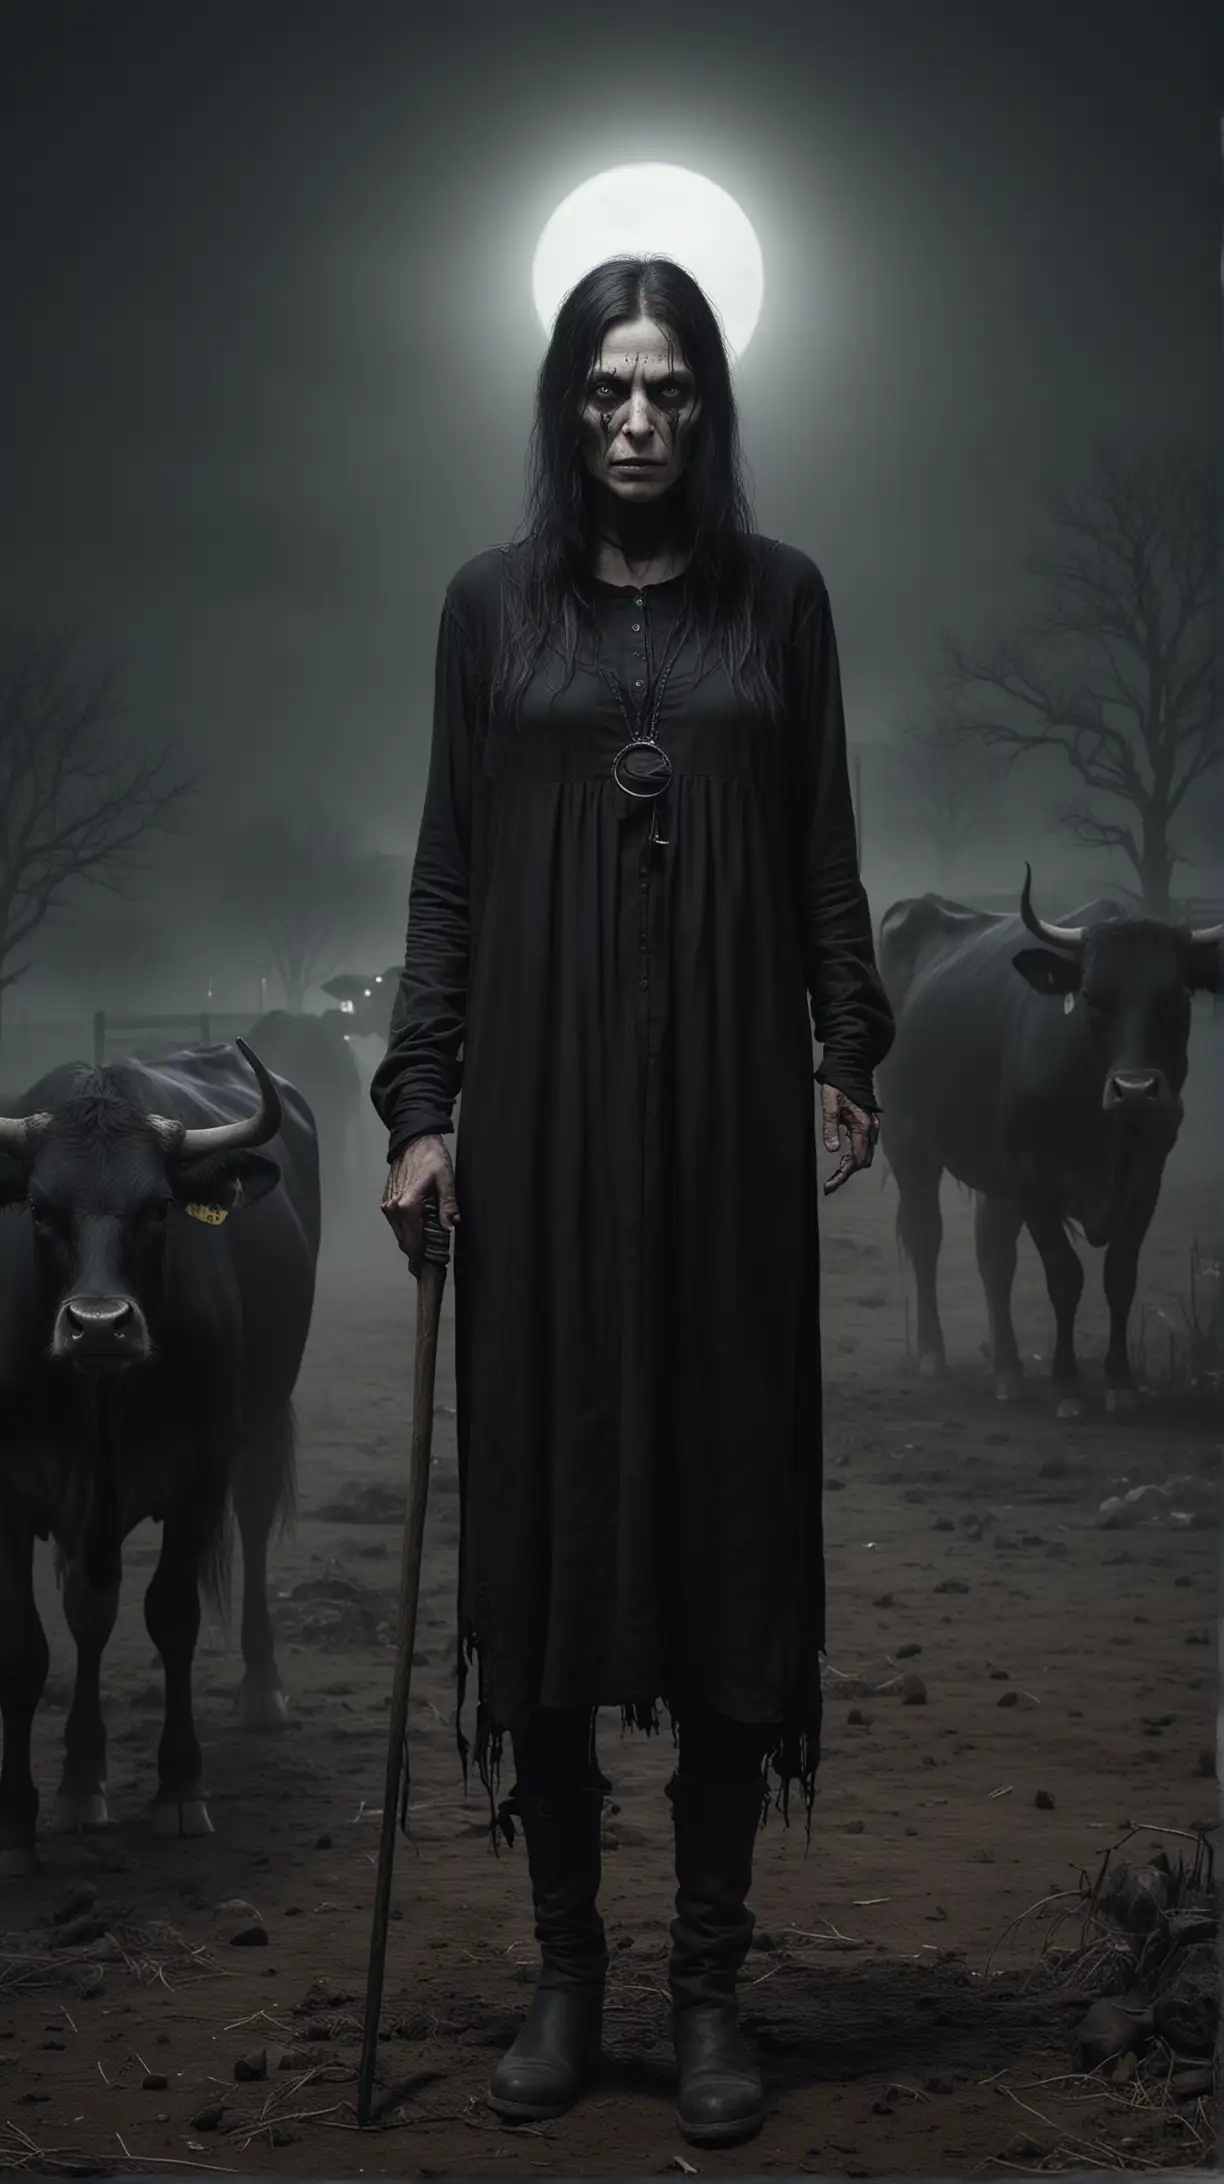 Eerie Midnight Encounter OneEyed Woman Amidst Cattle